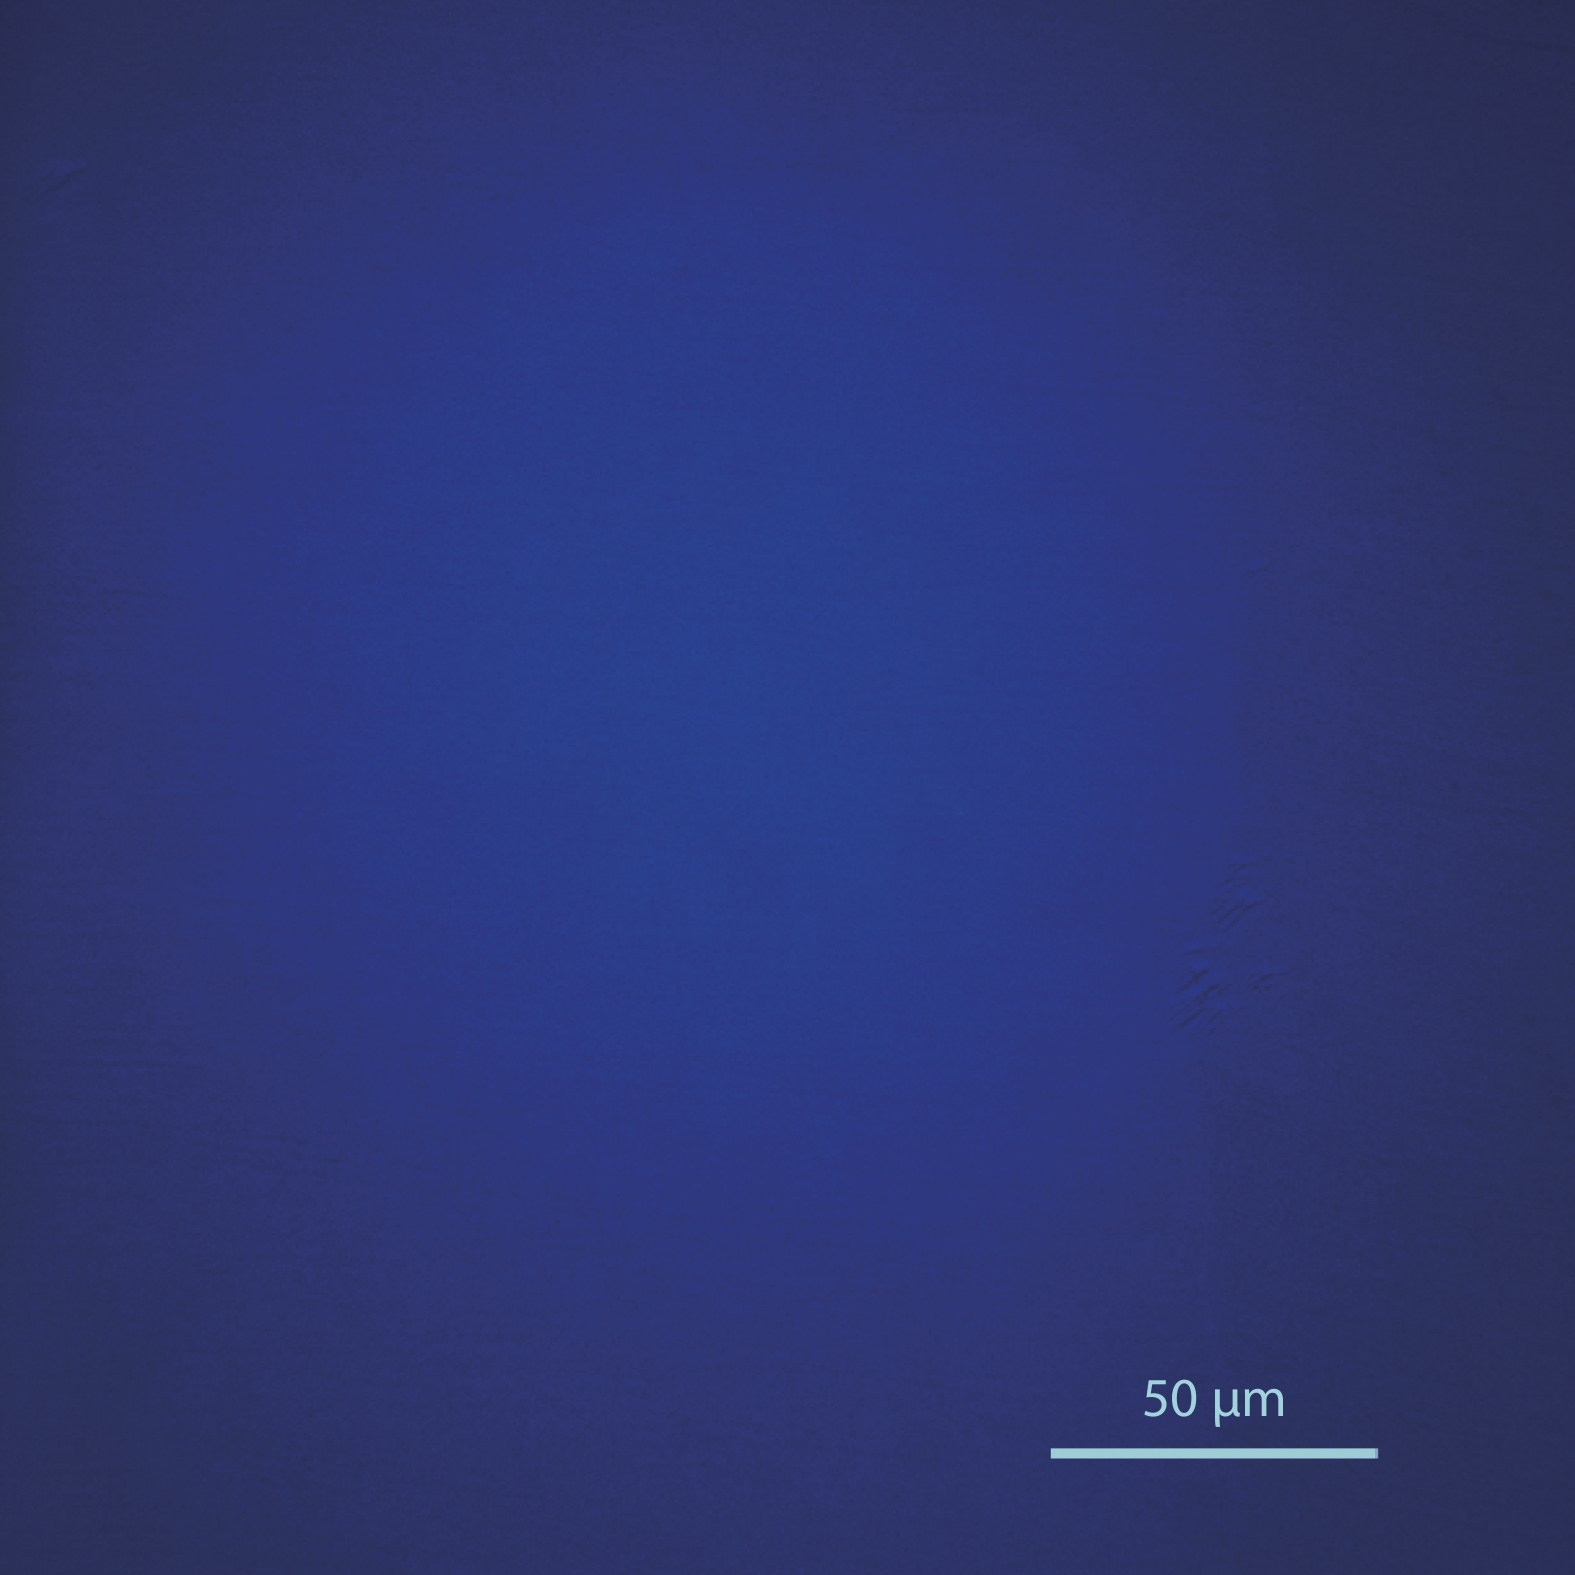 (Color online) Photoluminescence image in micro-scale of a GaN-based blue LD grown on GaN substrate.